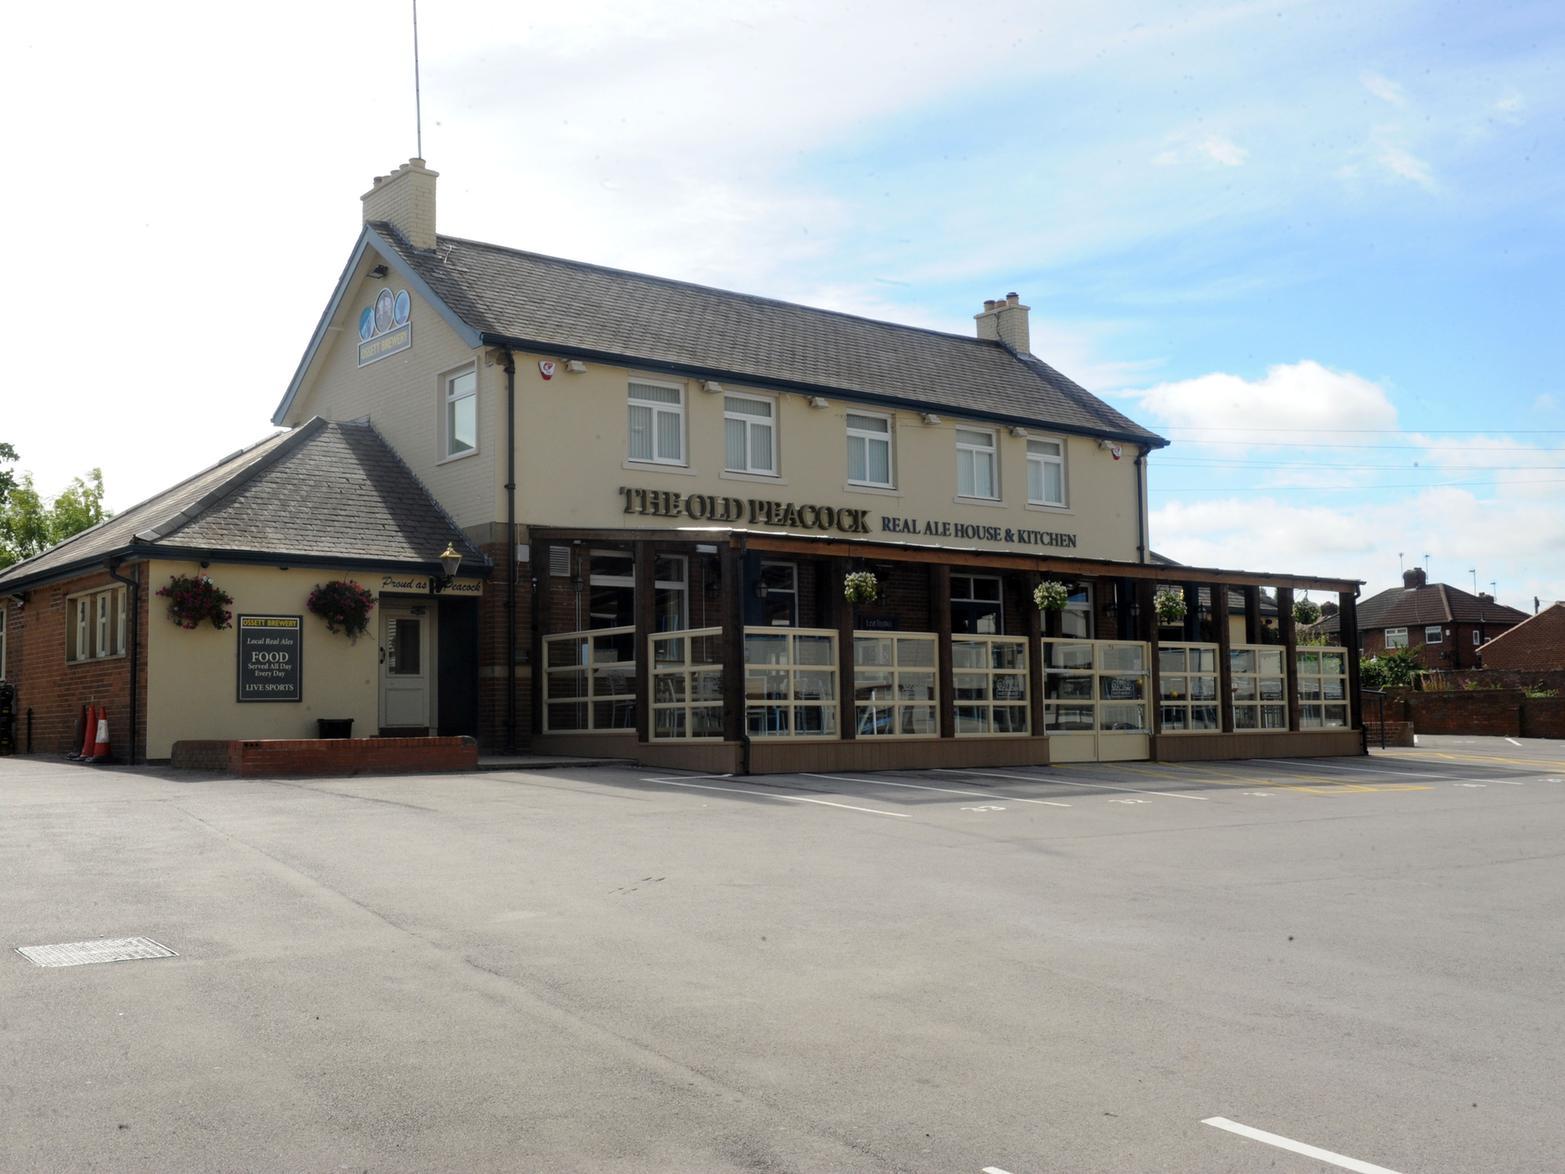 The iconic pub on Elland Road has a separate restaurant in collaboration with The Spiced Mango, serving an exclusive Indian menu on an evening and weekend. One reviewer said: 'Great pub, even better Indian'